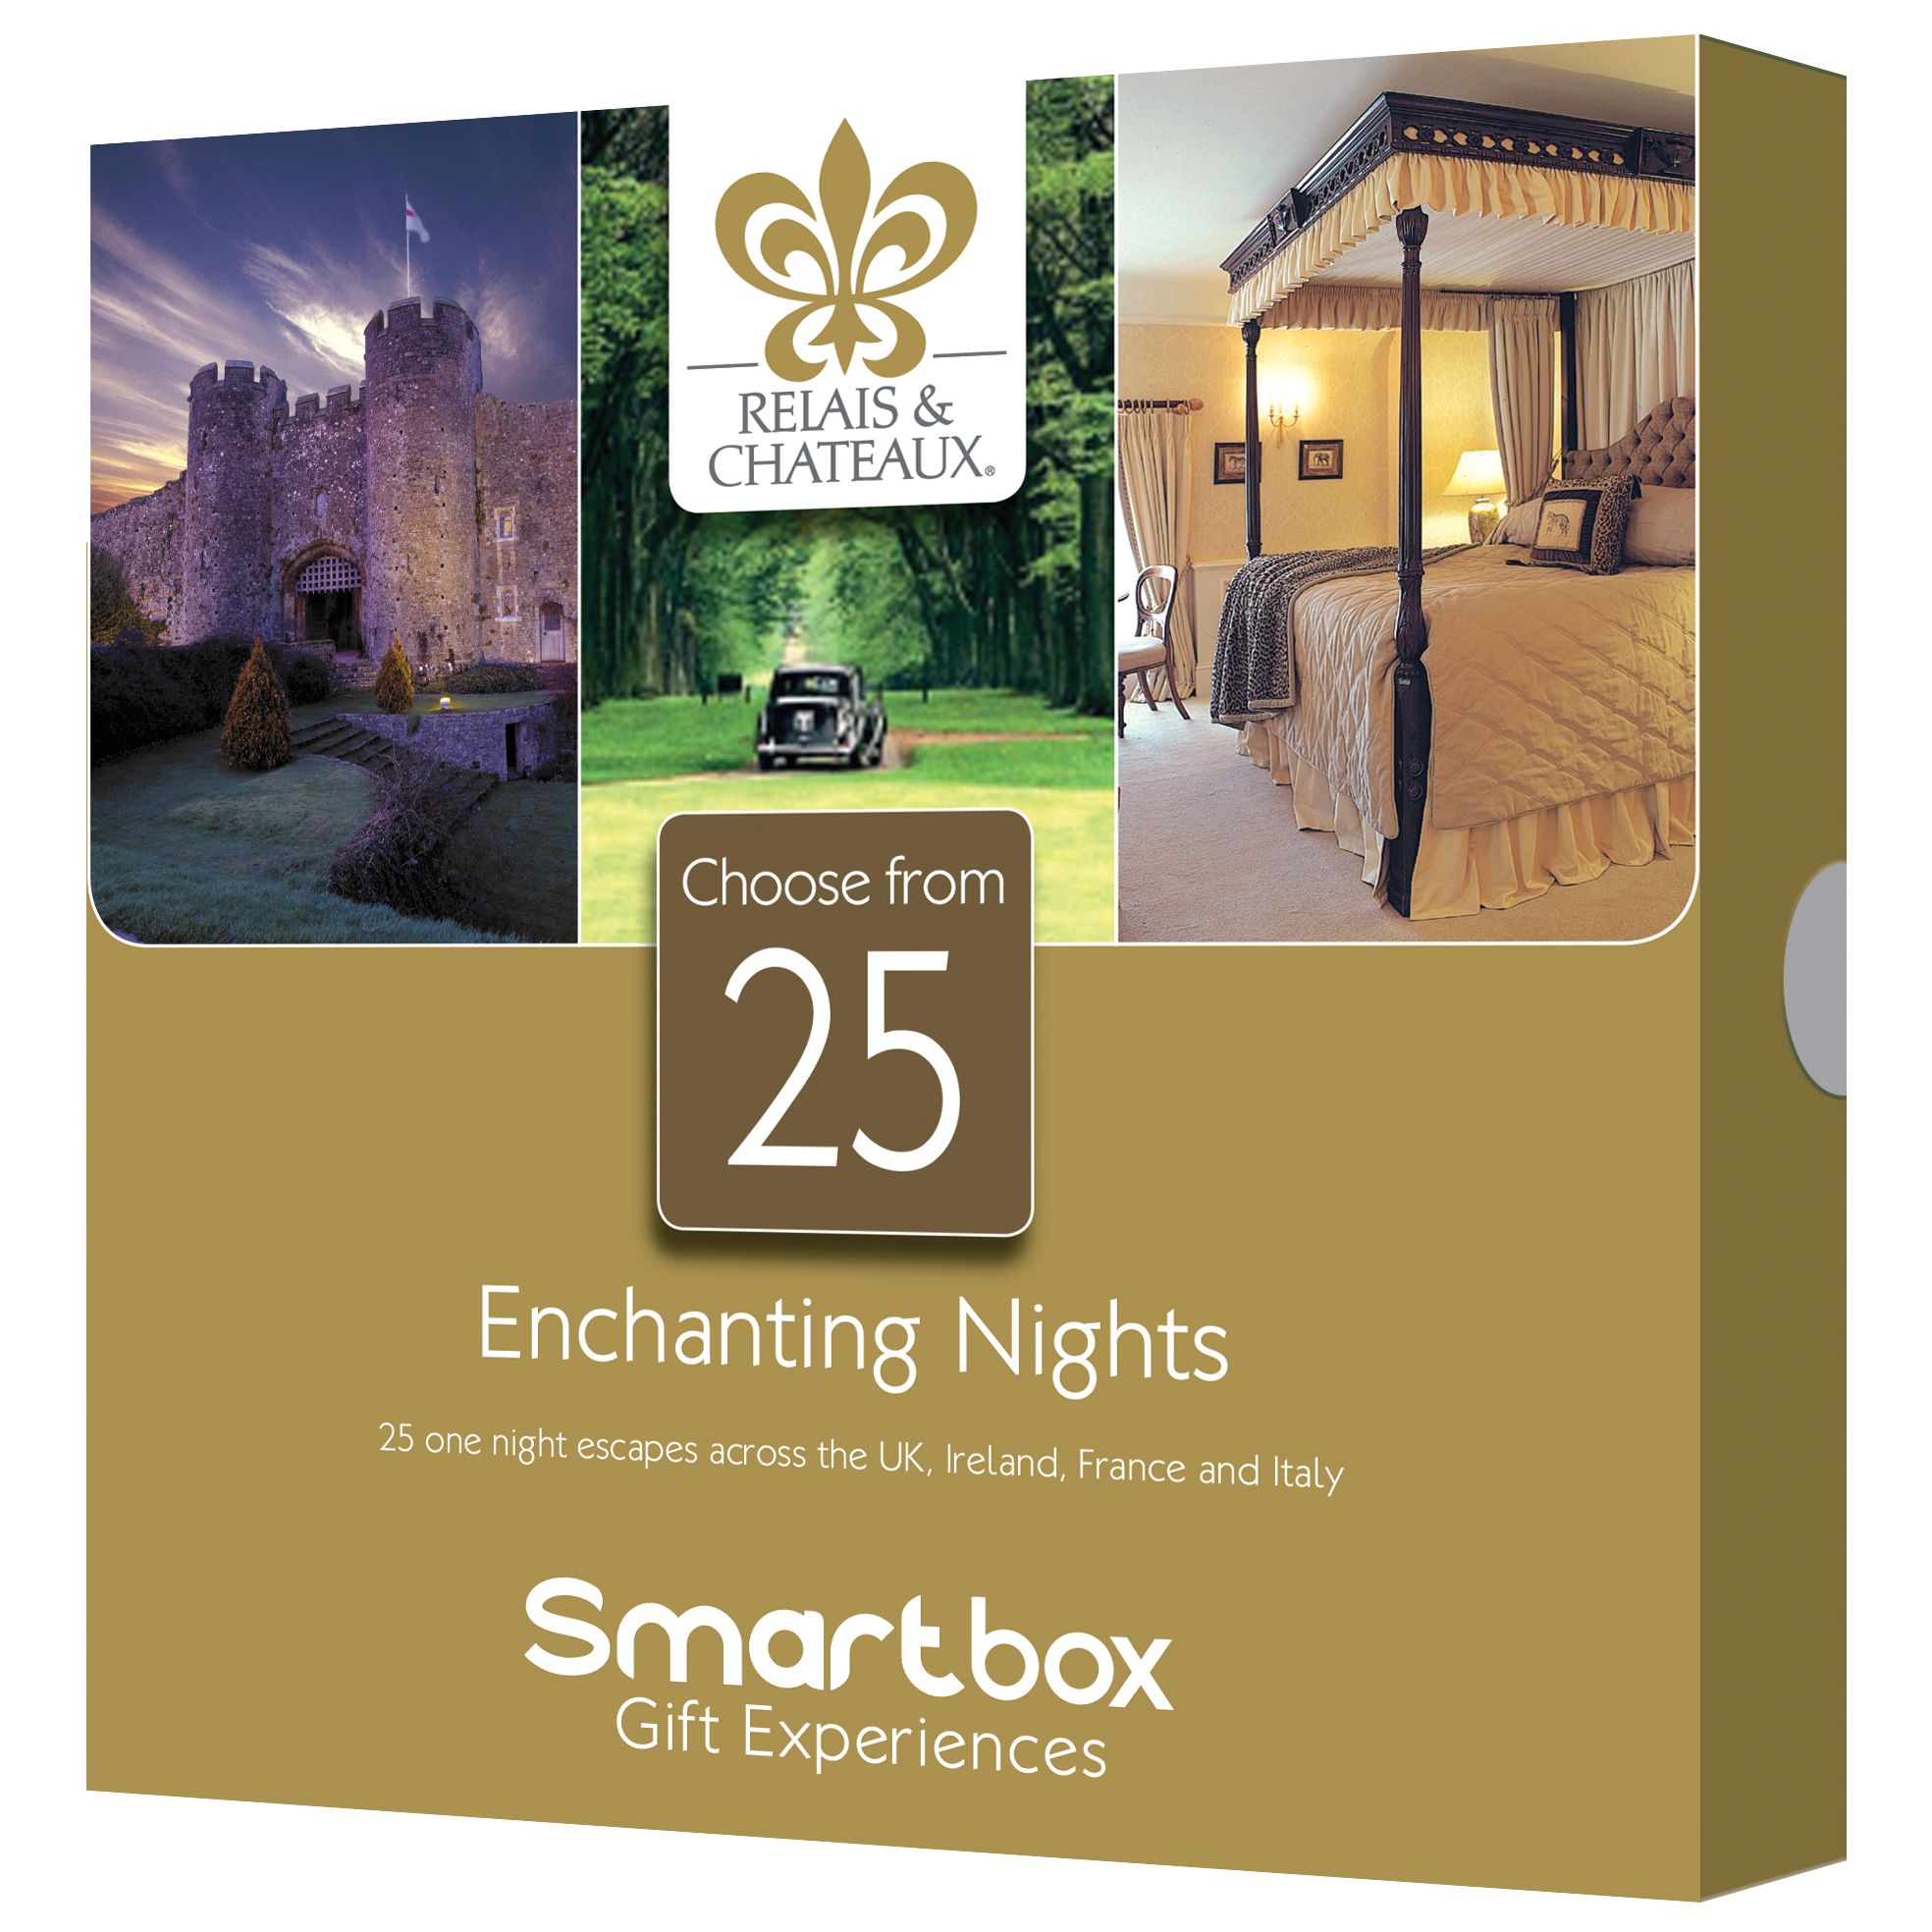 Smartbox Relais & Chateaux Enchanting Nights for 2 at John Lewis